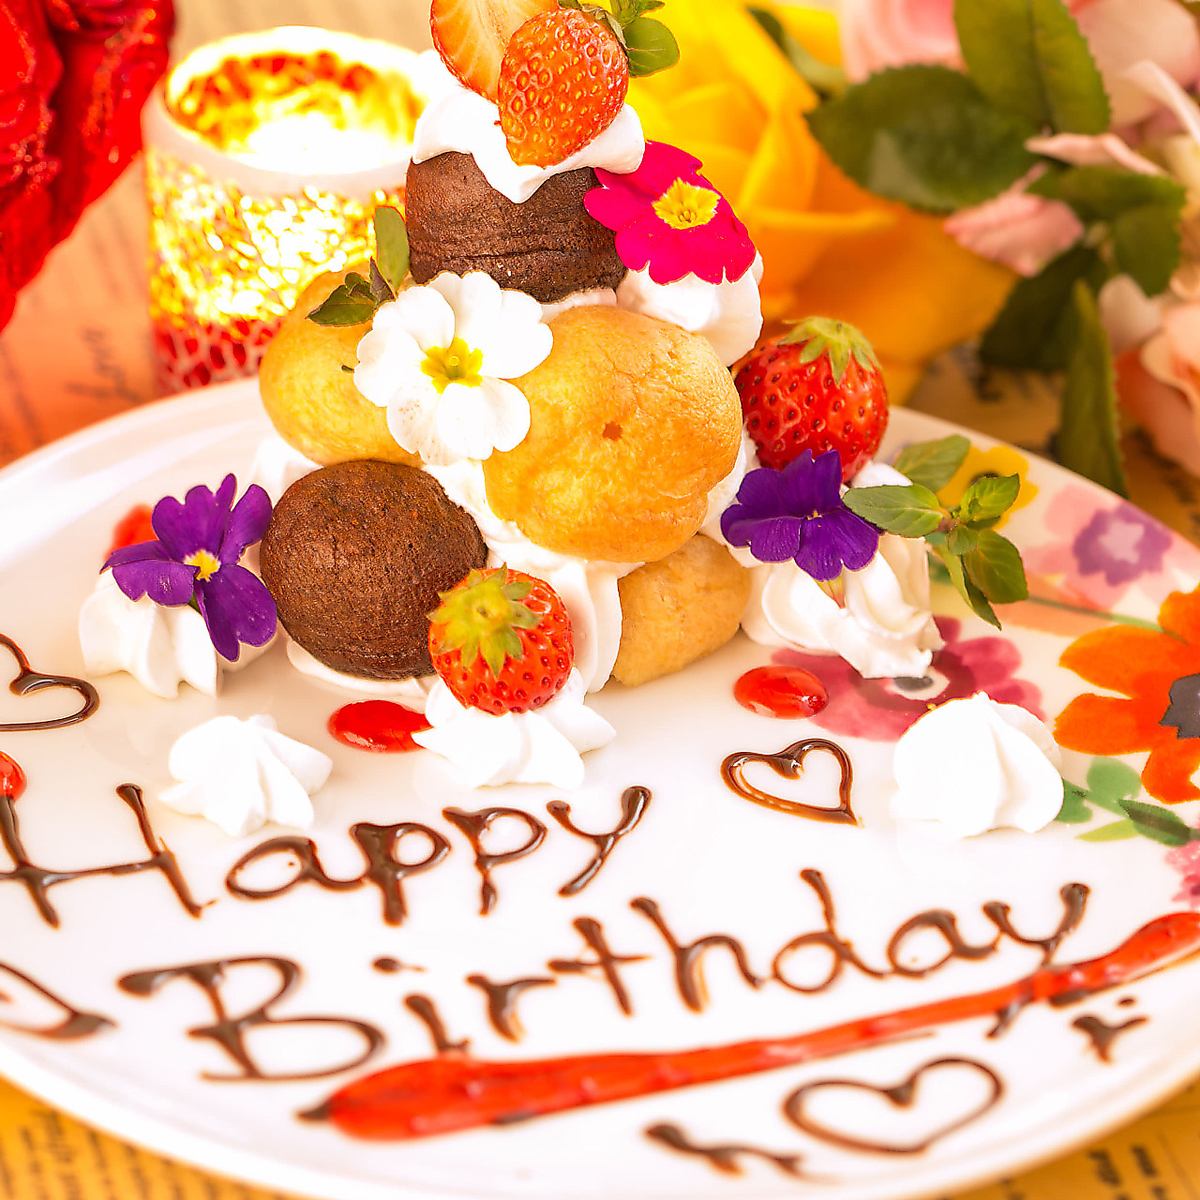 On birthdays and anniversaries ♪ We will give you our special dessert plate ☆